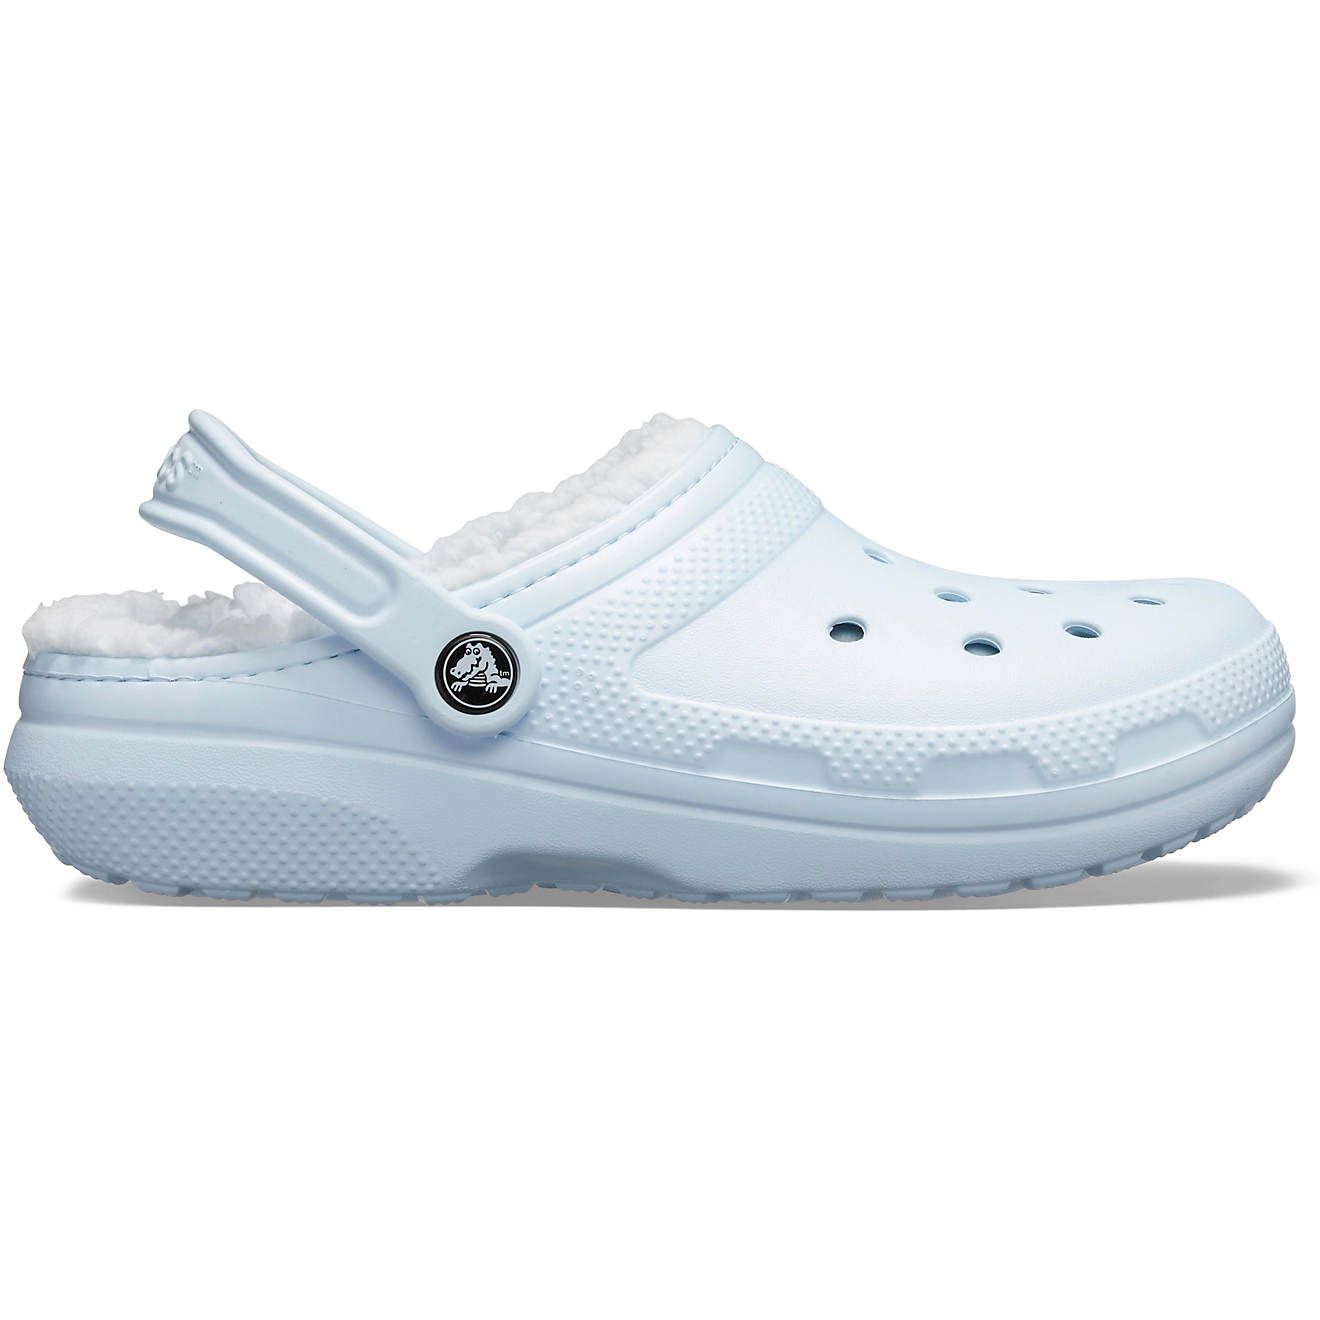 at Academy with these fresh new Crocs